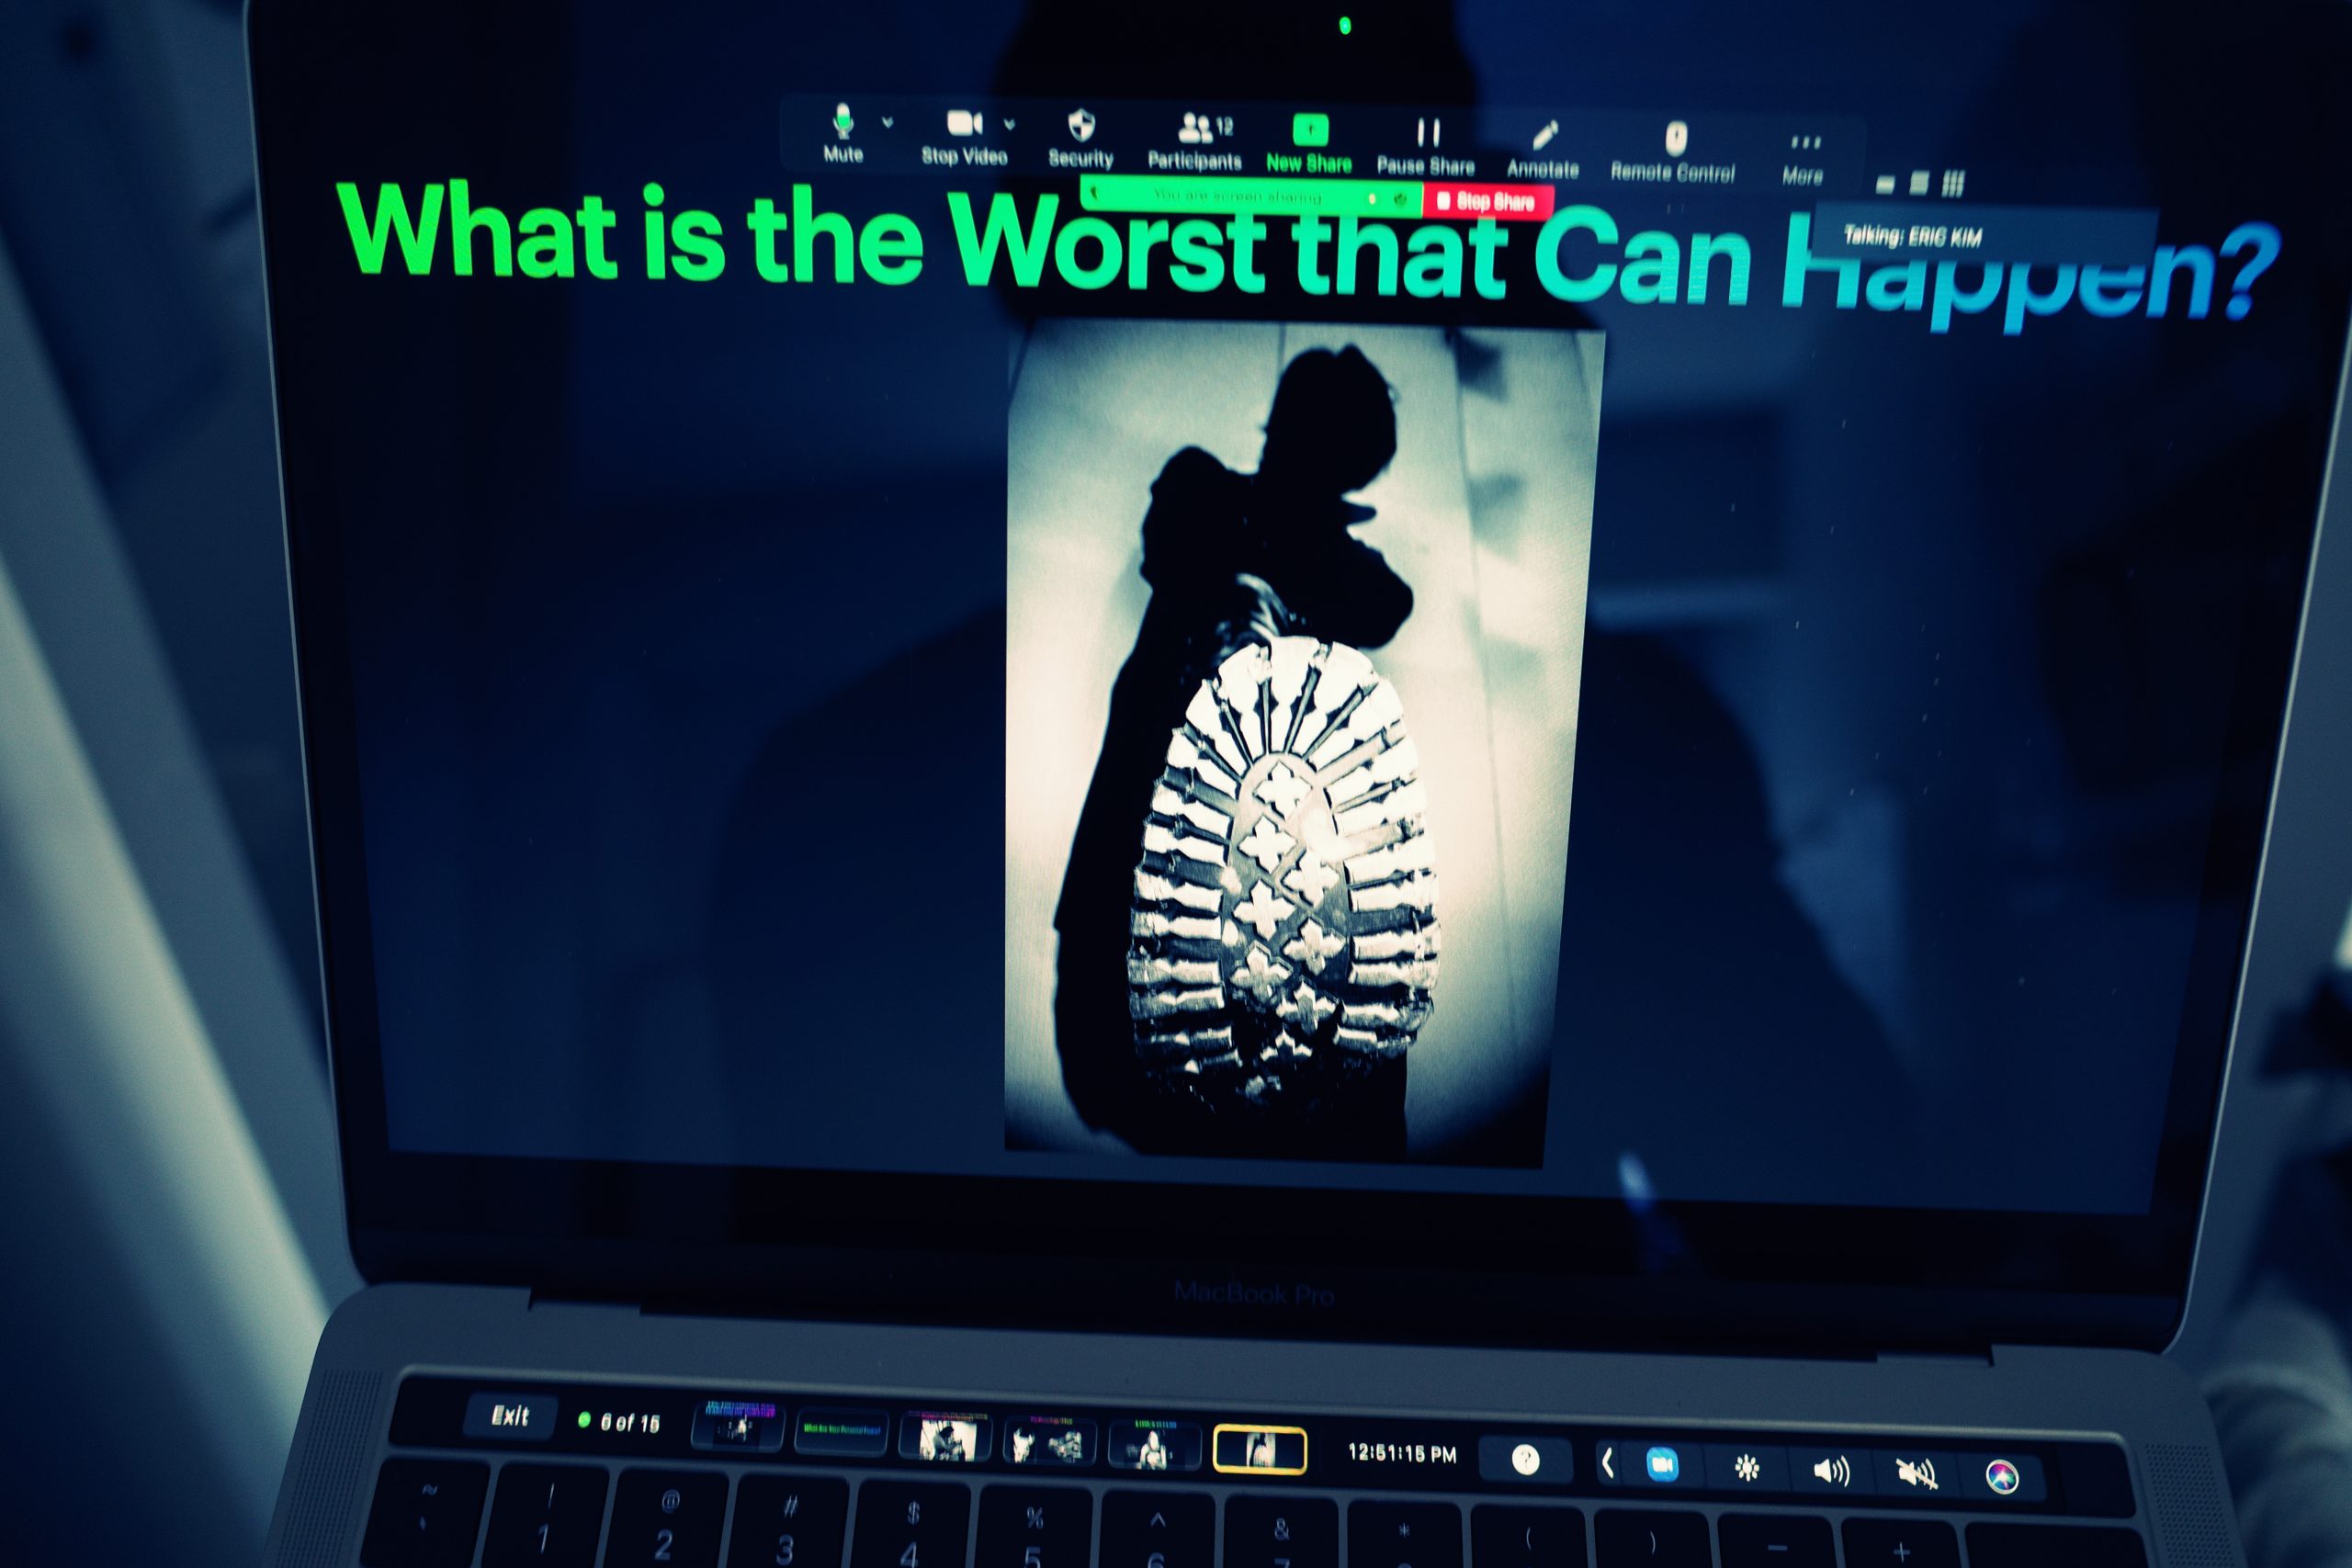 What is the worst that can happen?